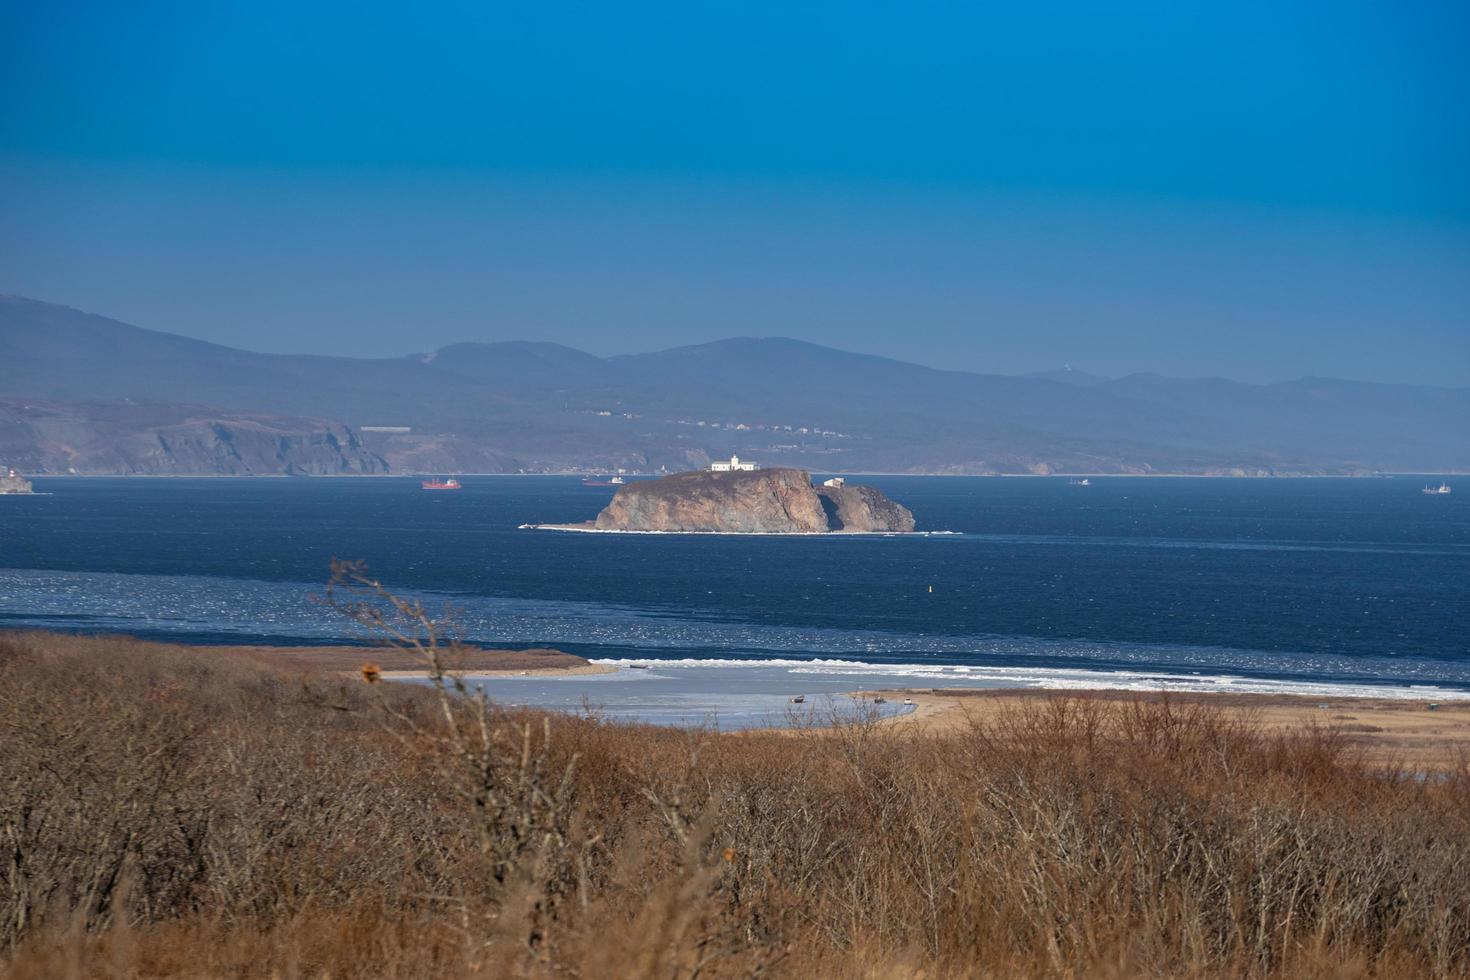 Seascape of an island in a body of water with coastline in Vladivostok, Russia photo